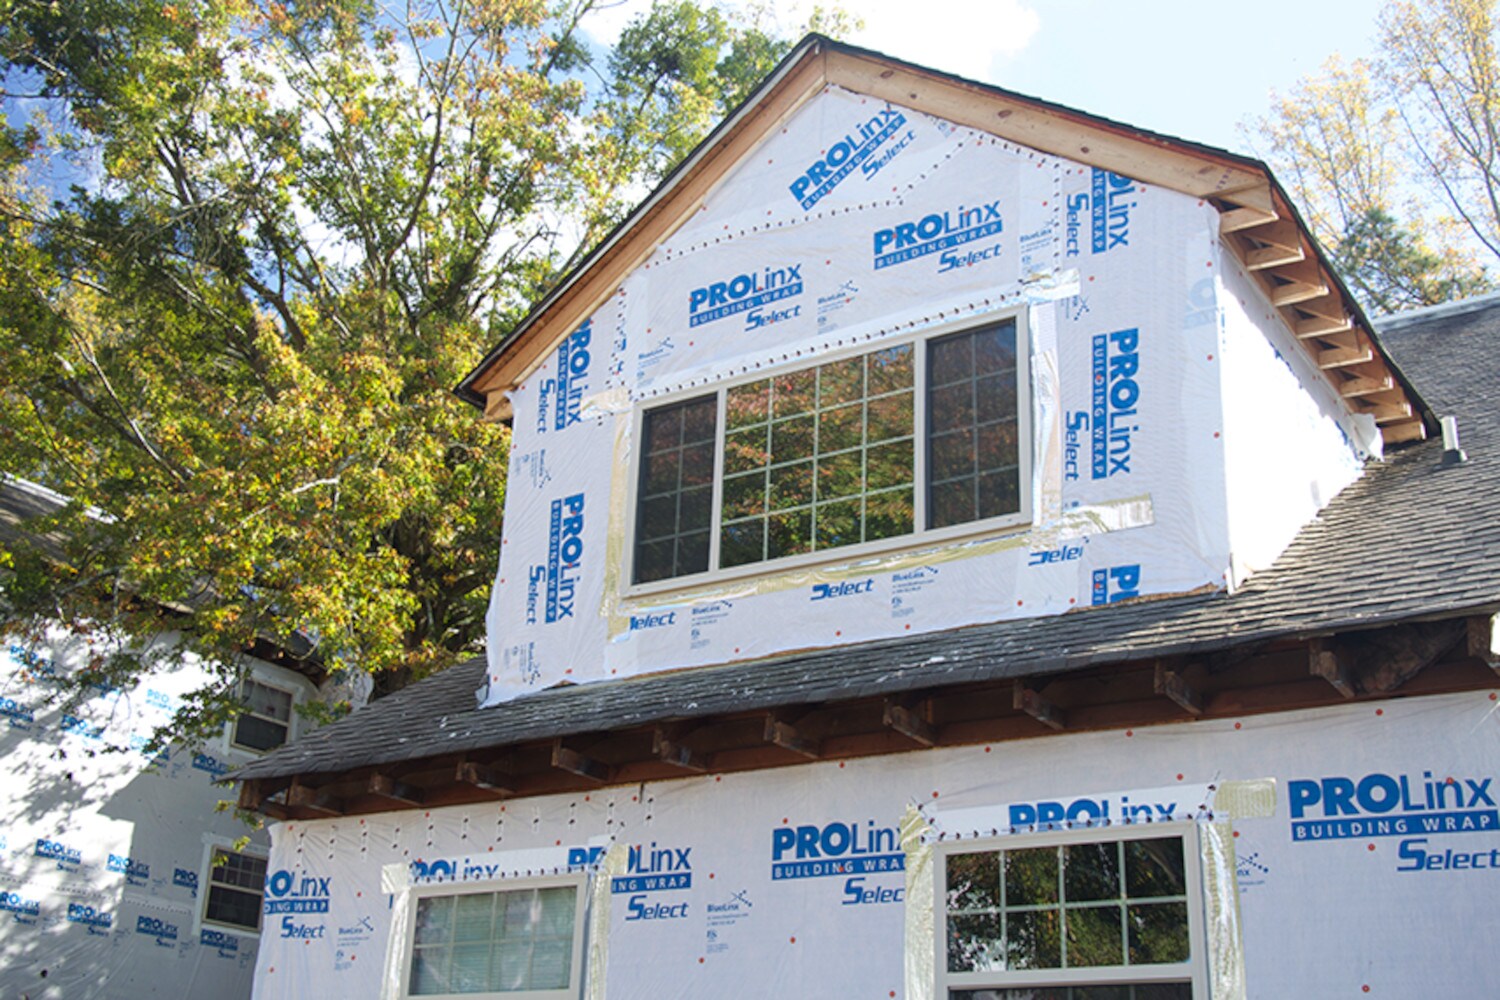 Tyvek 5-ft x 200-ft Water Resistant House Wrap (1000-sq ft) in the House  Wrap department at